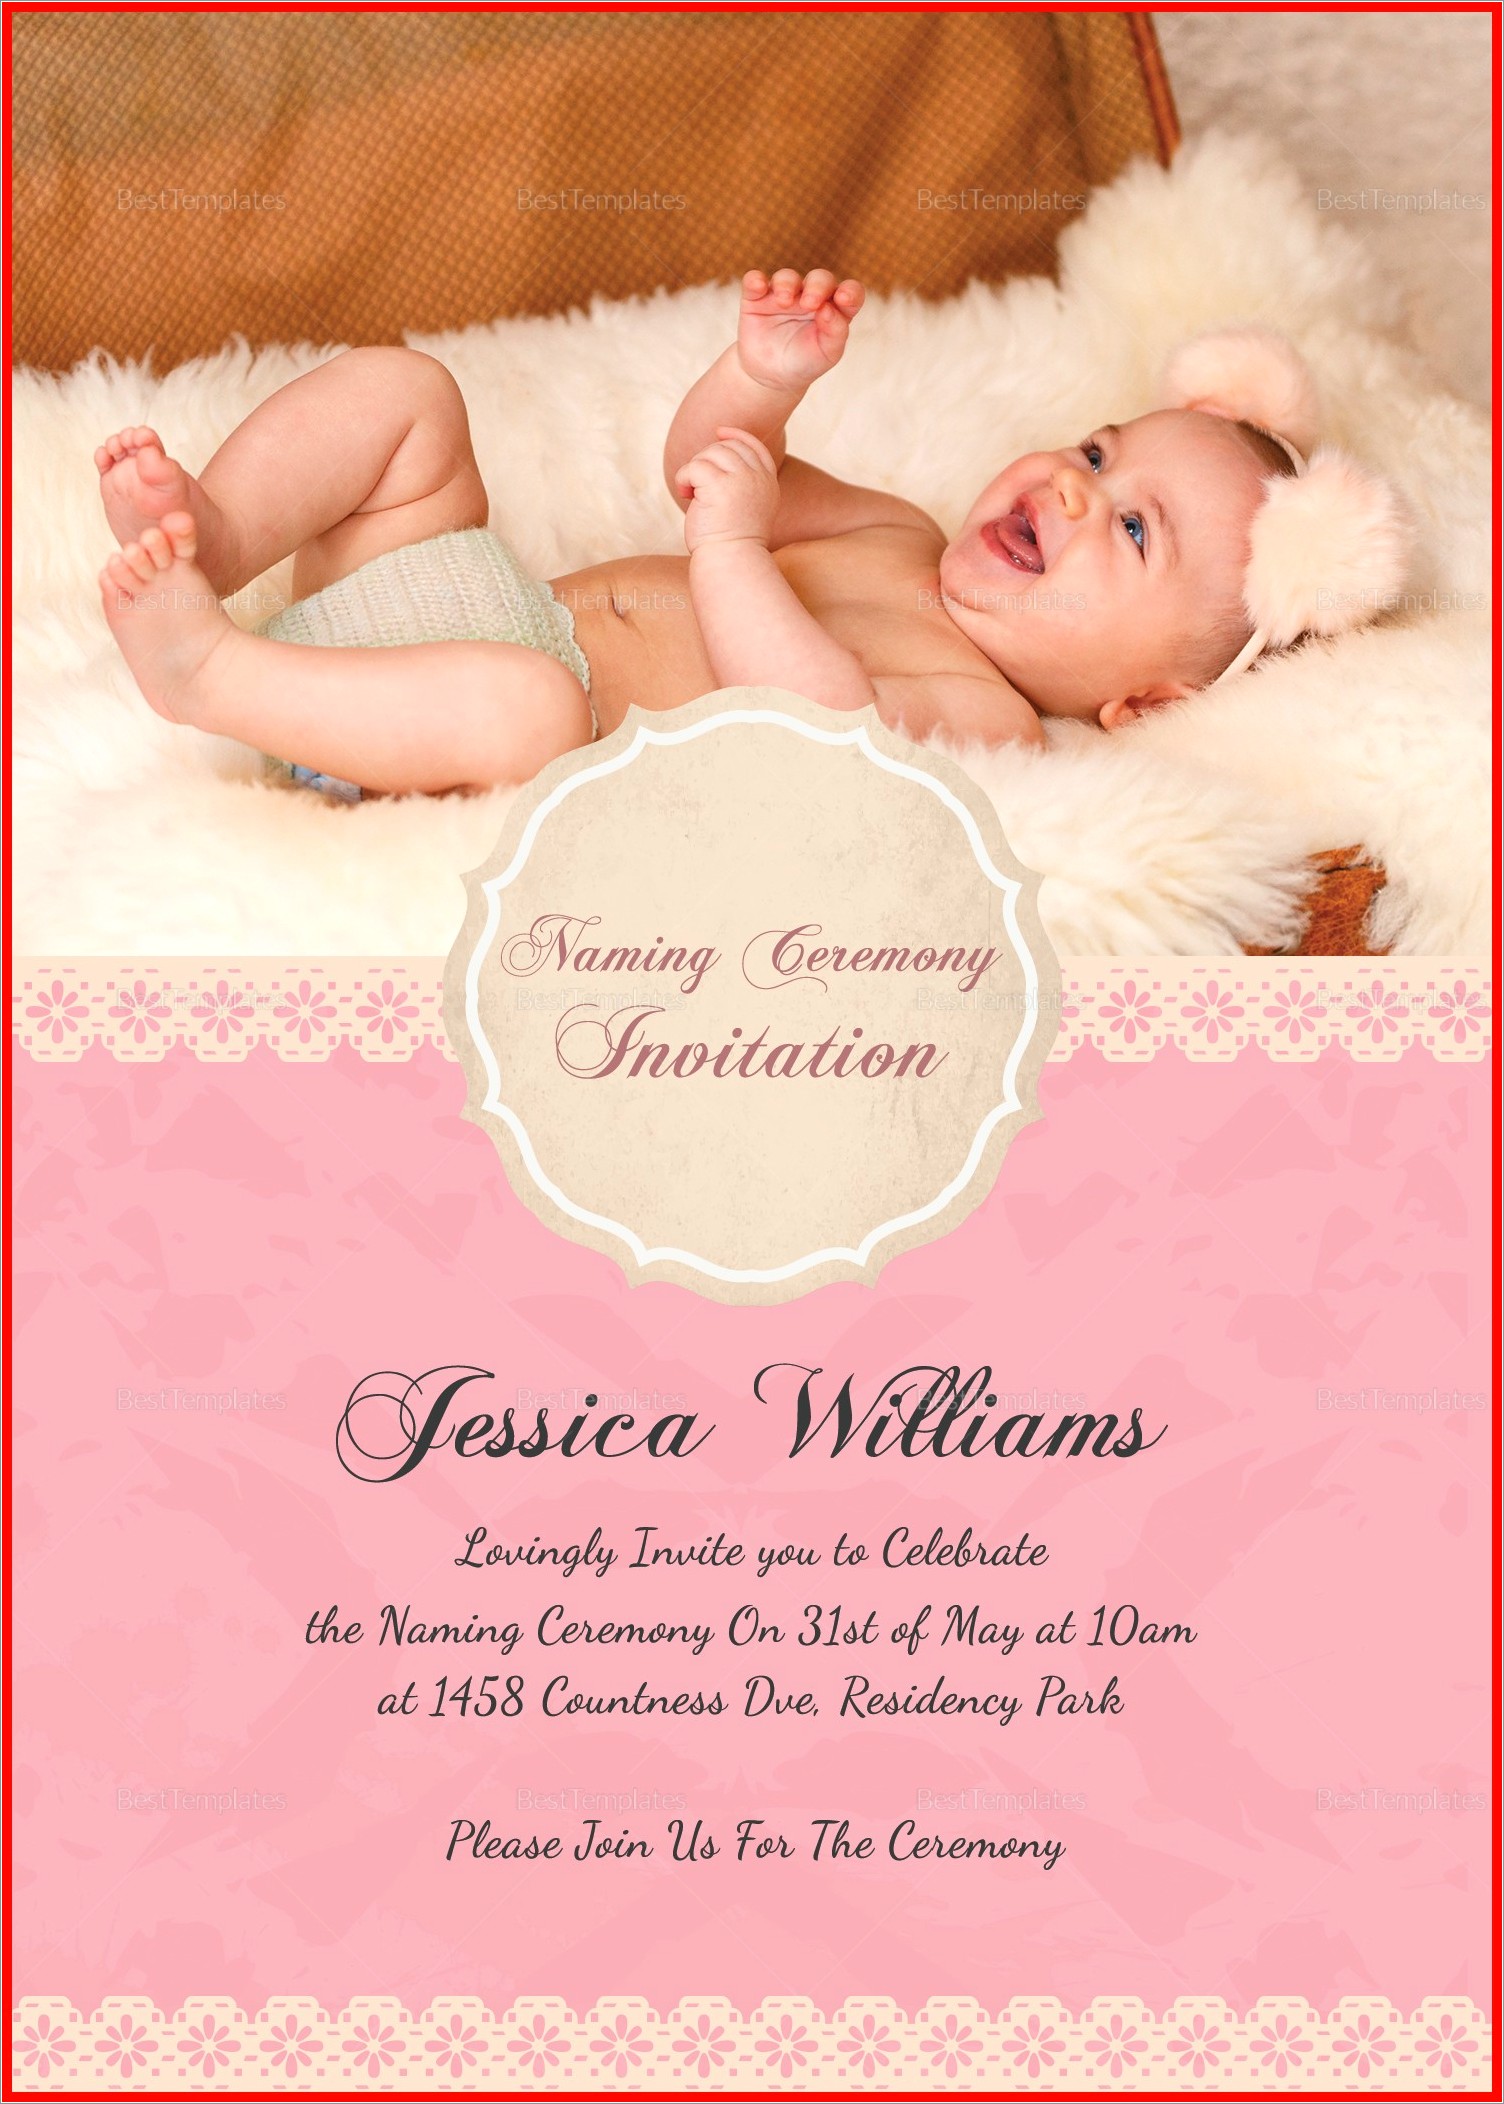 Naming Ceremony Invitation Template Free Download